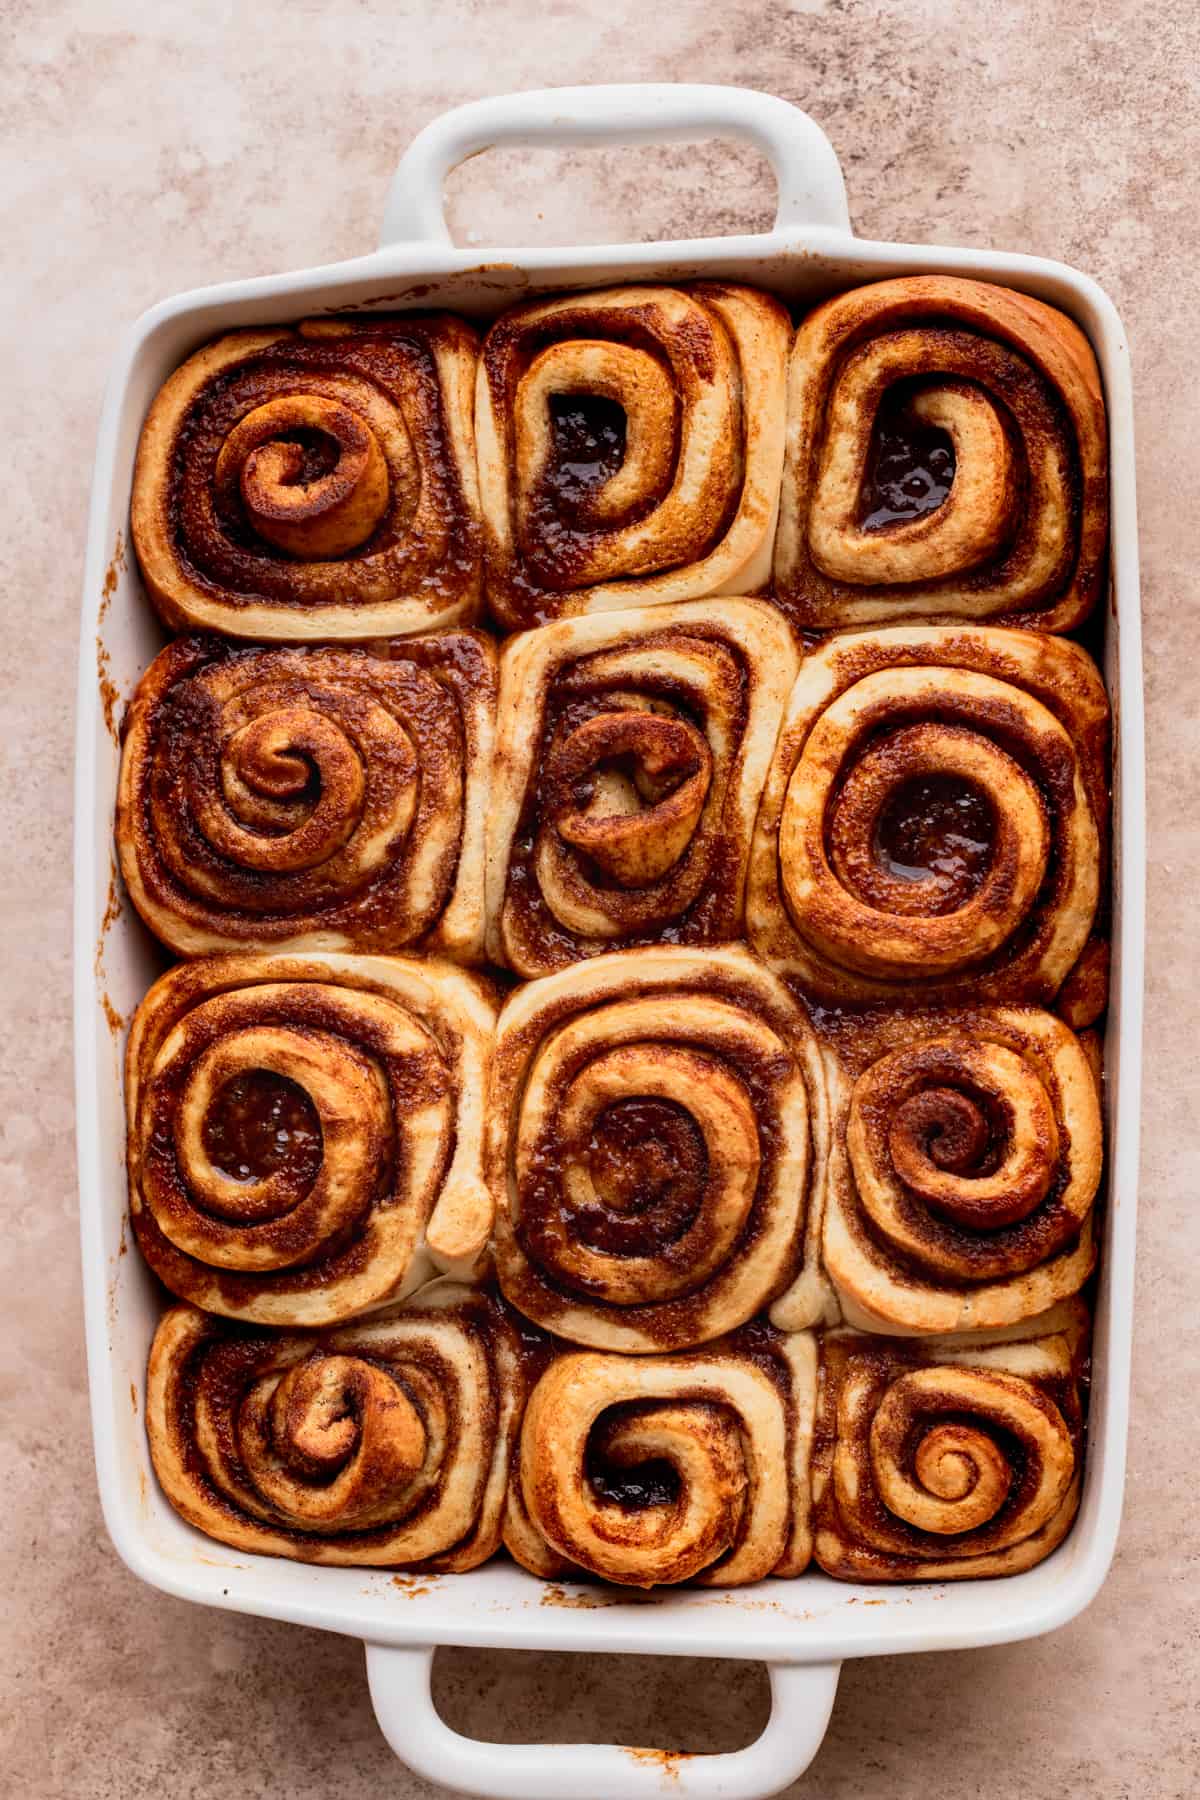 Baked rolls in the pan.